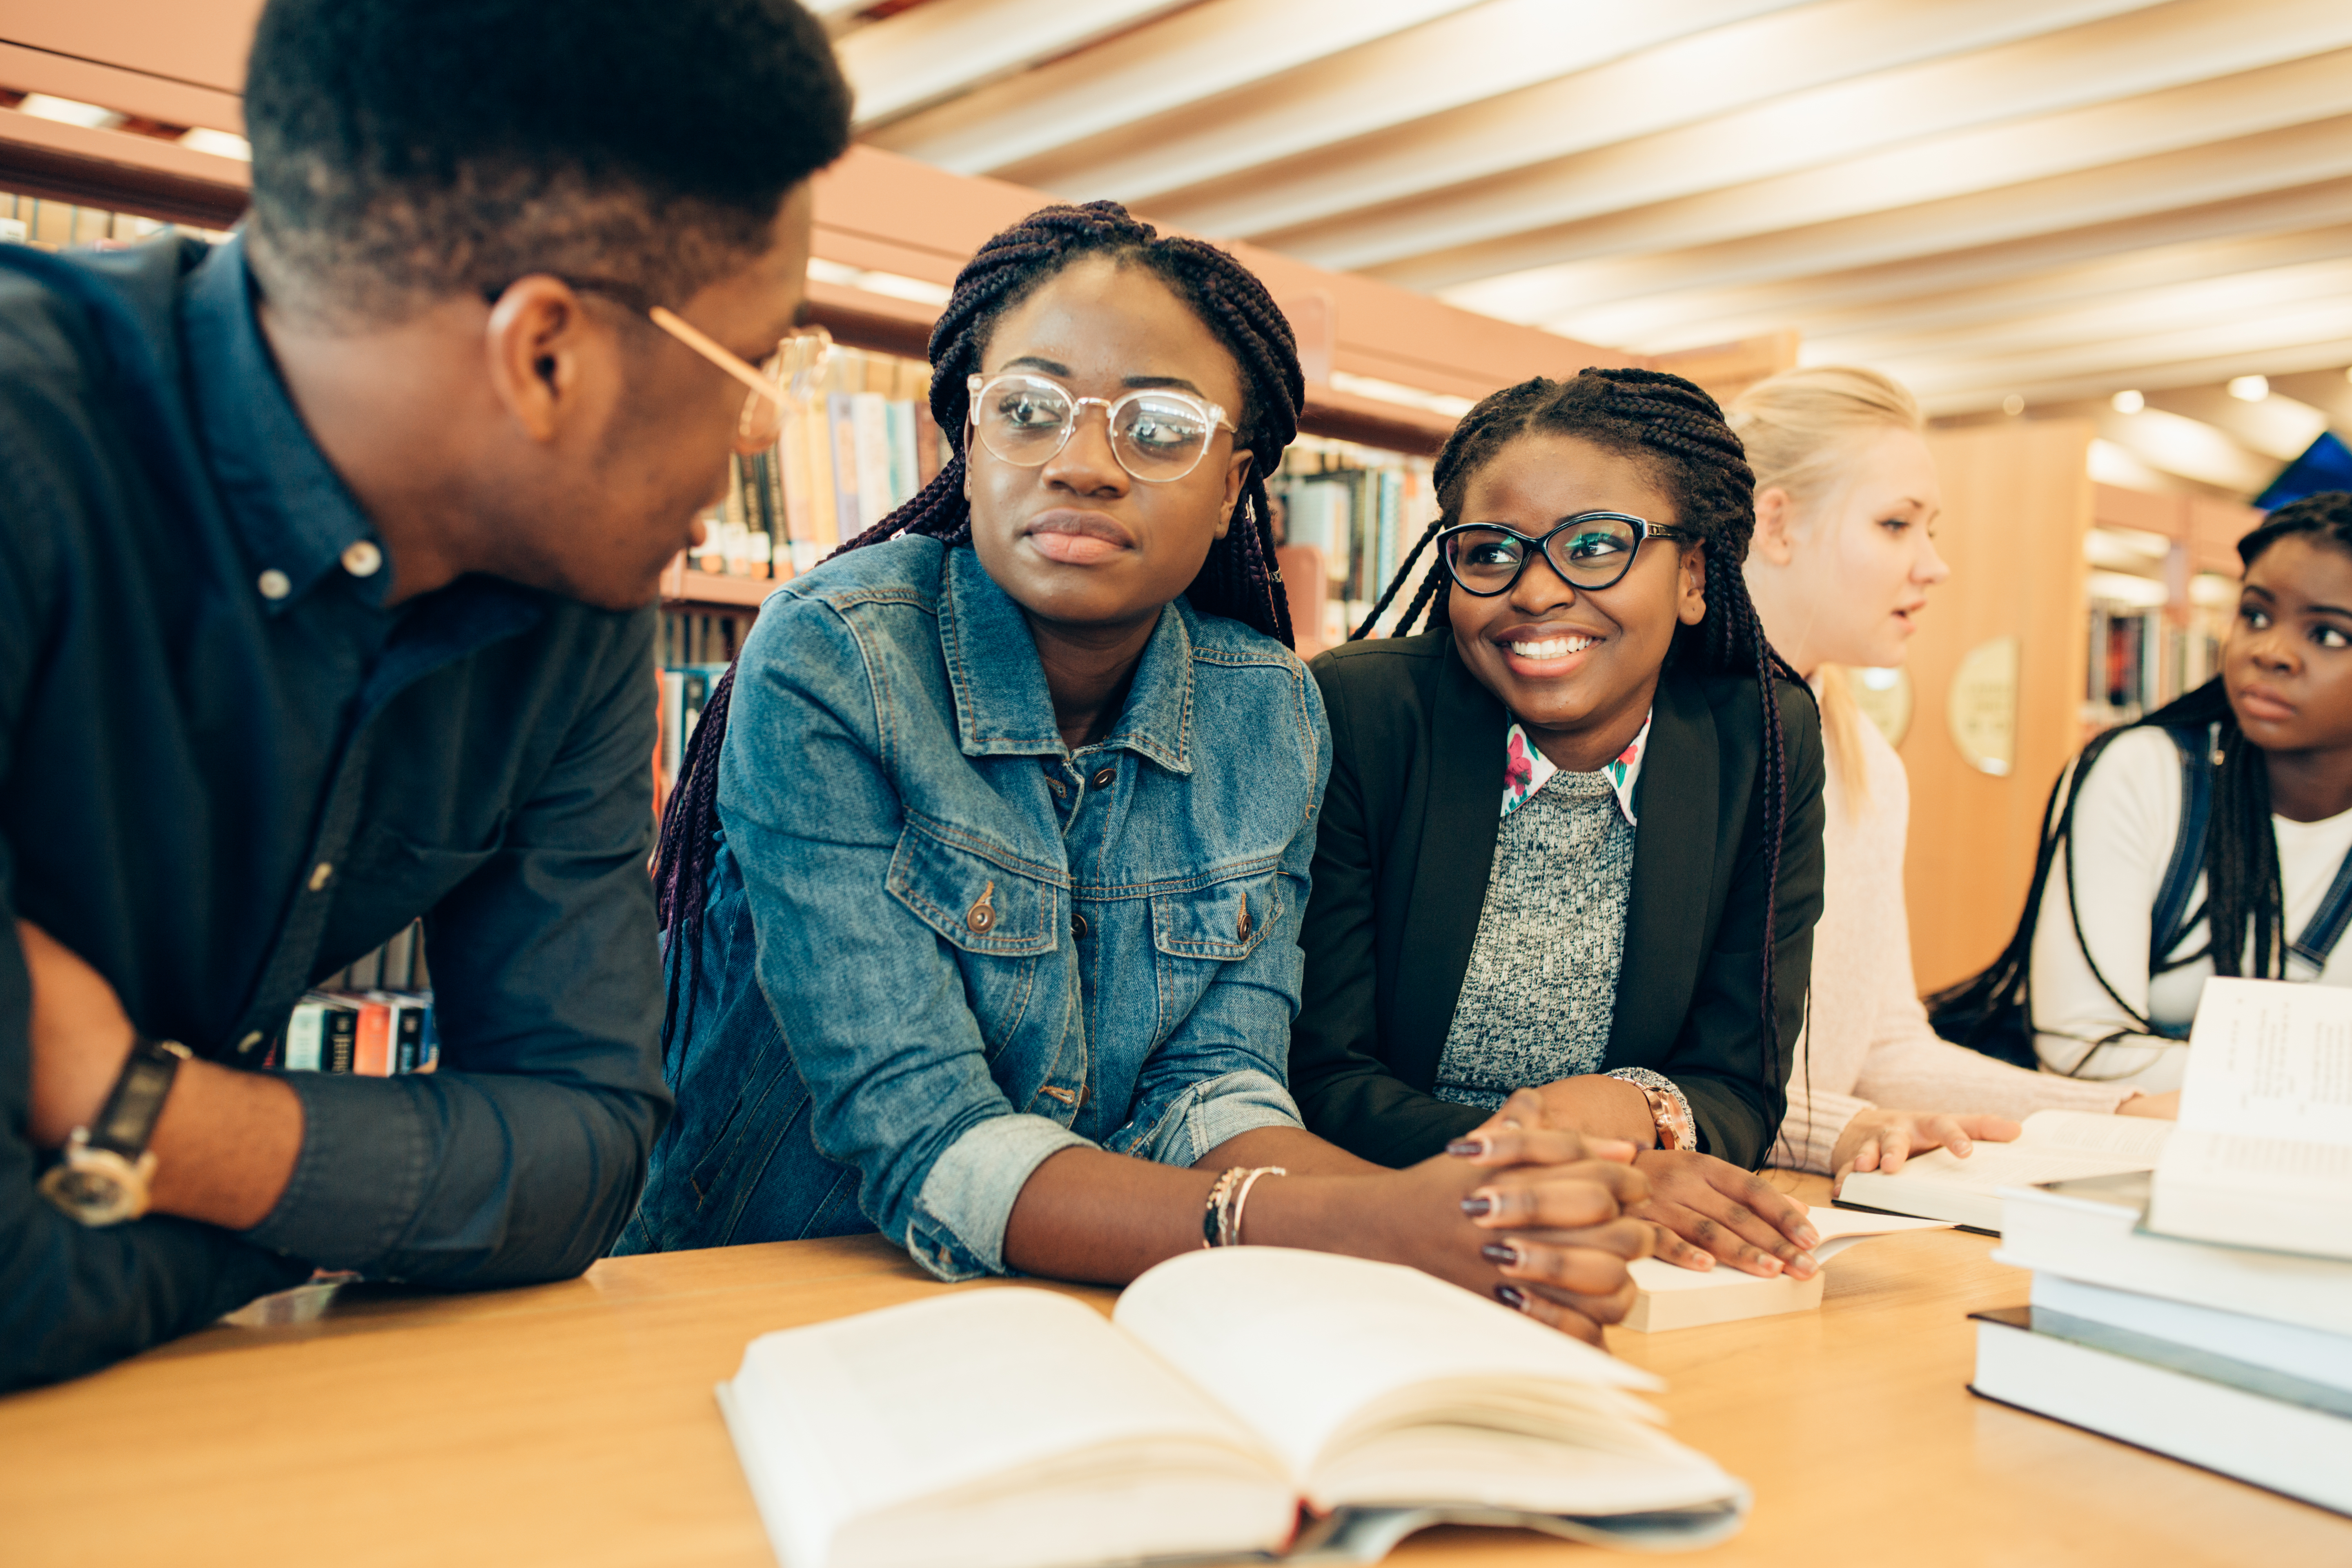 Through the Upward Bound Grant, underrepresented youths with academic potential can develop academic and social skills necessary for admittance in post-secondary education.